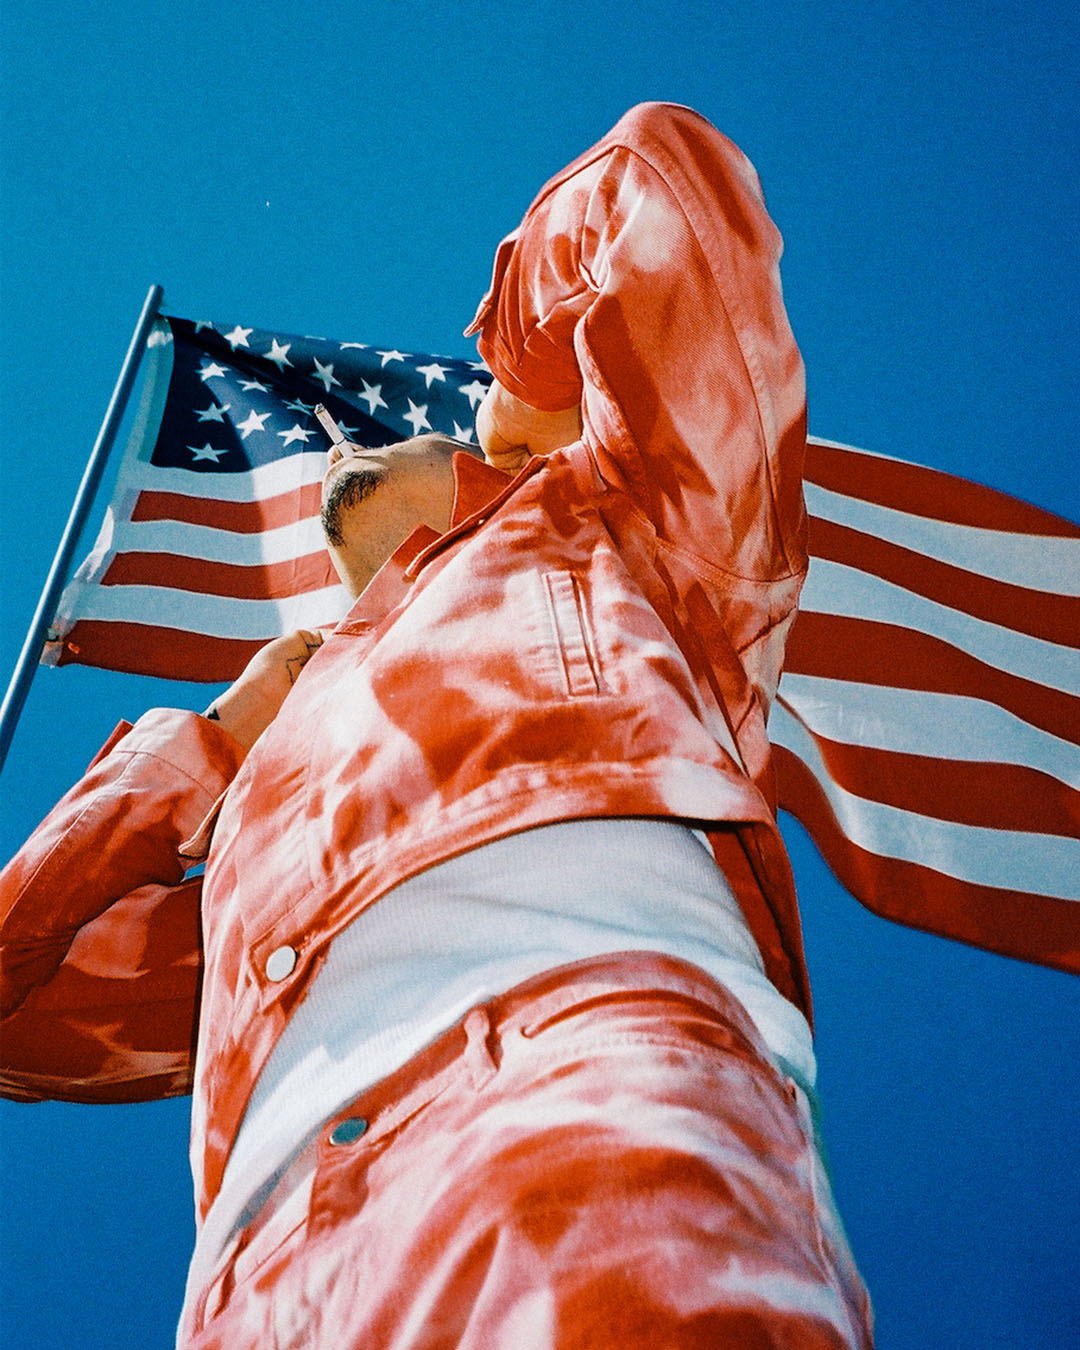 mitchell modes 424 tie dye jeans and jacket shot by kristen bromiley